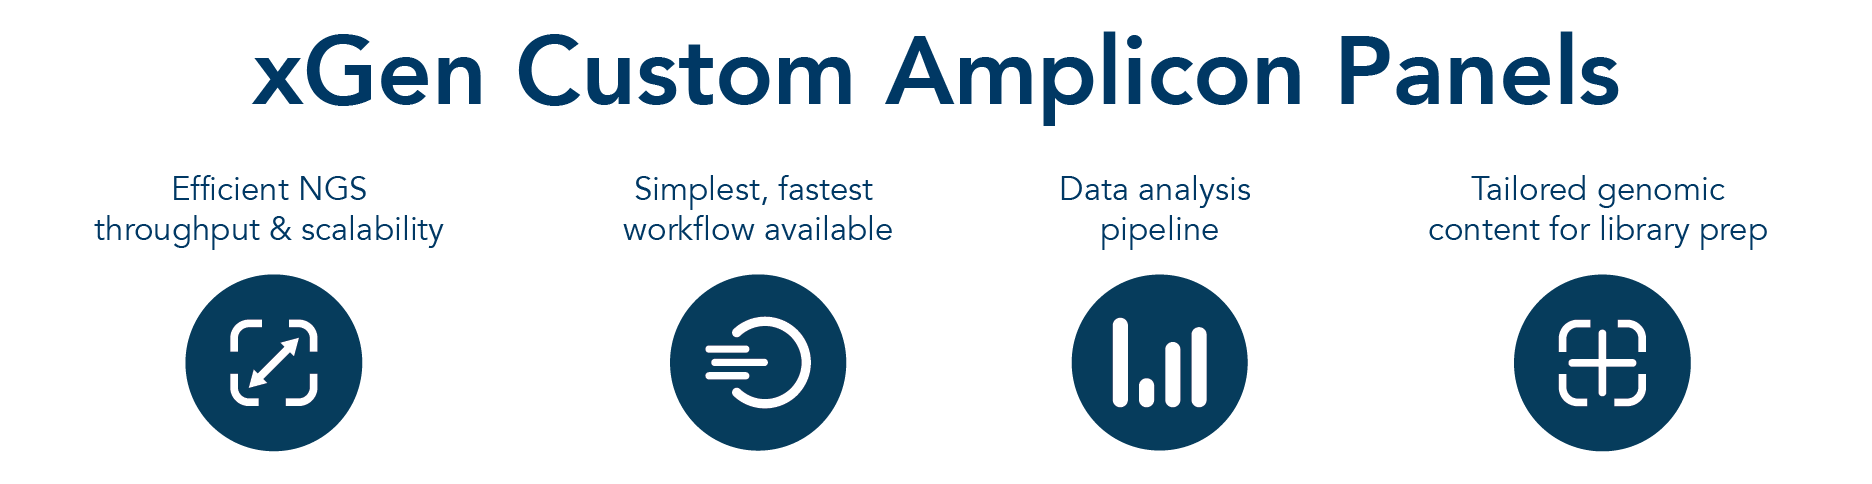 xGen Custom Amplicon Panels with multiplex primer sets for amplicon sequencing.